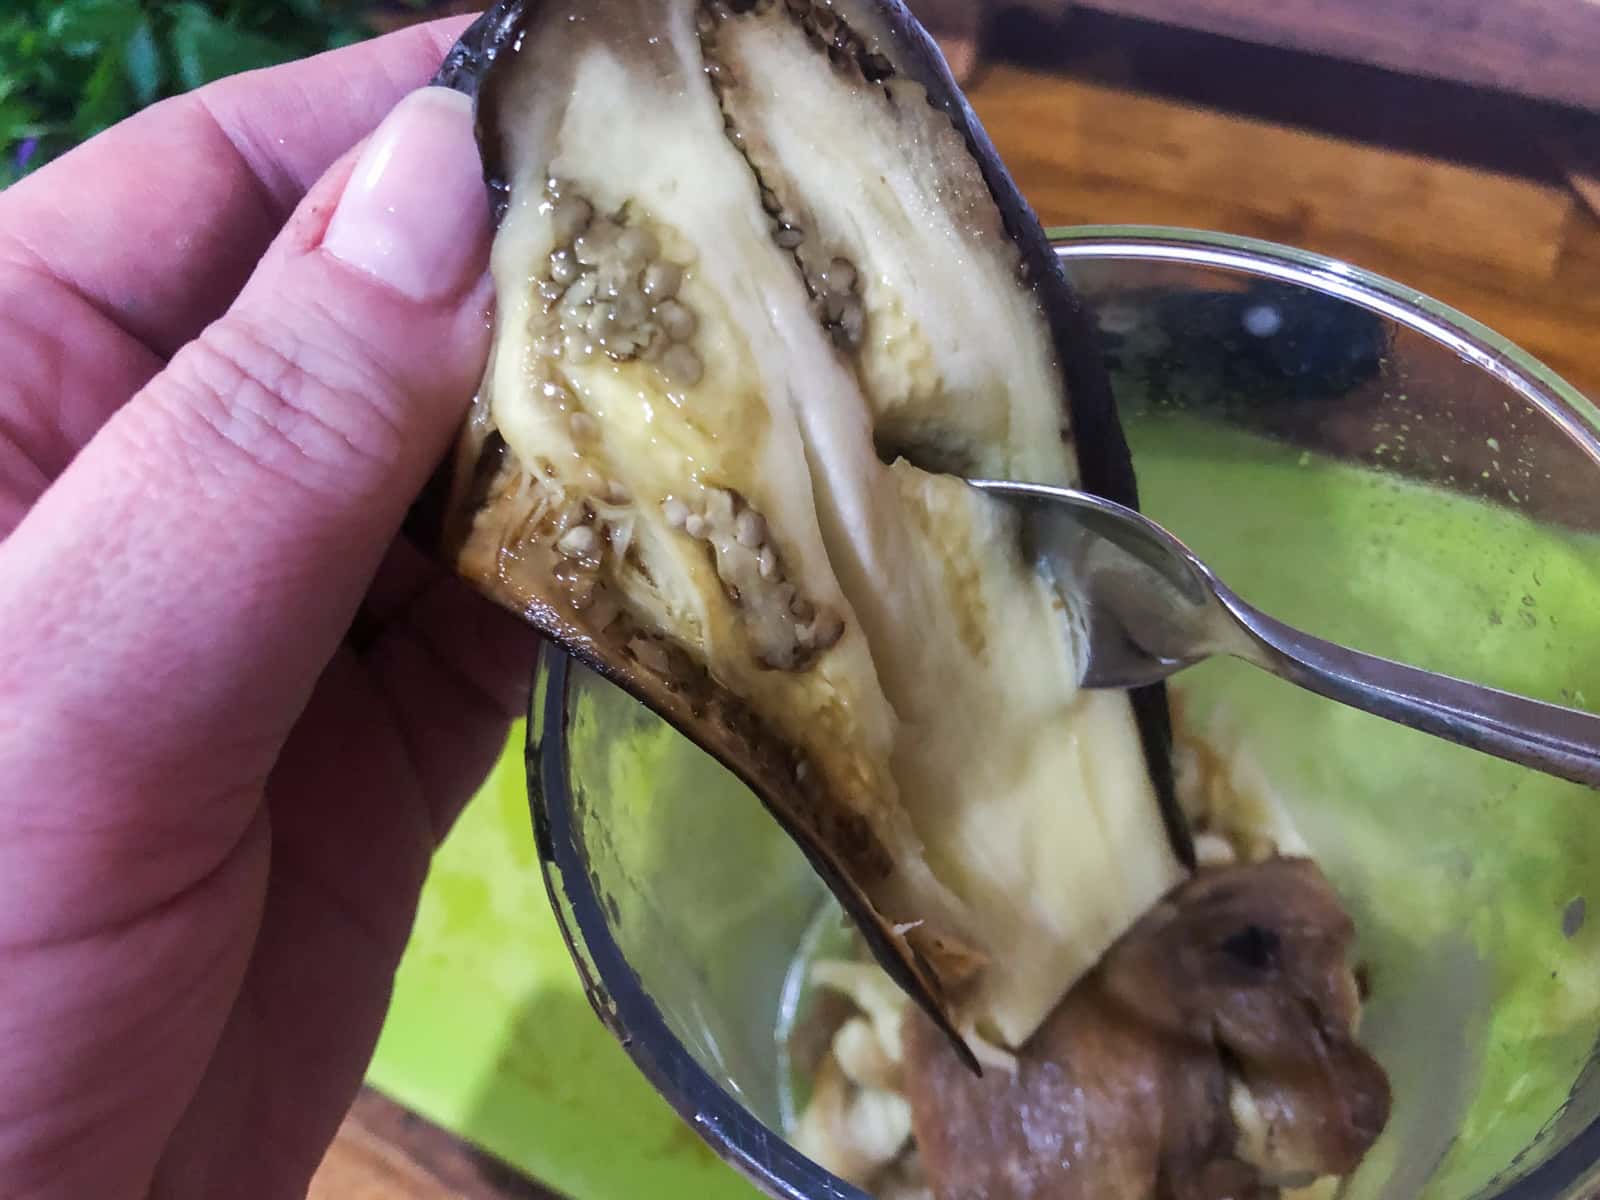 Removing the baked inside pulp from a cooked aubergine (eggplant) to make a dip.